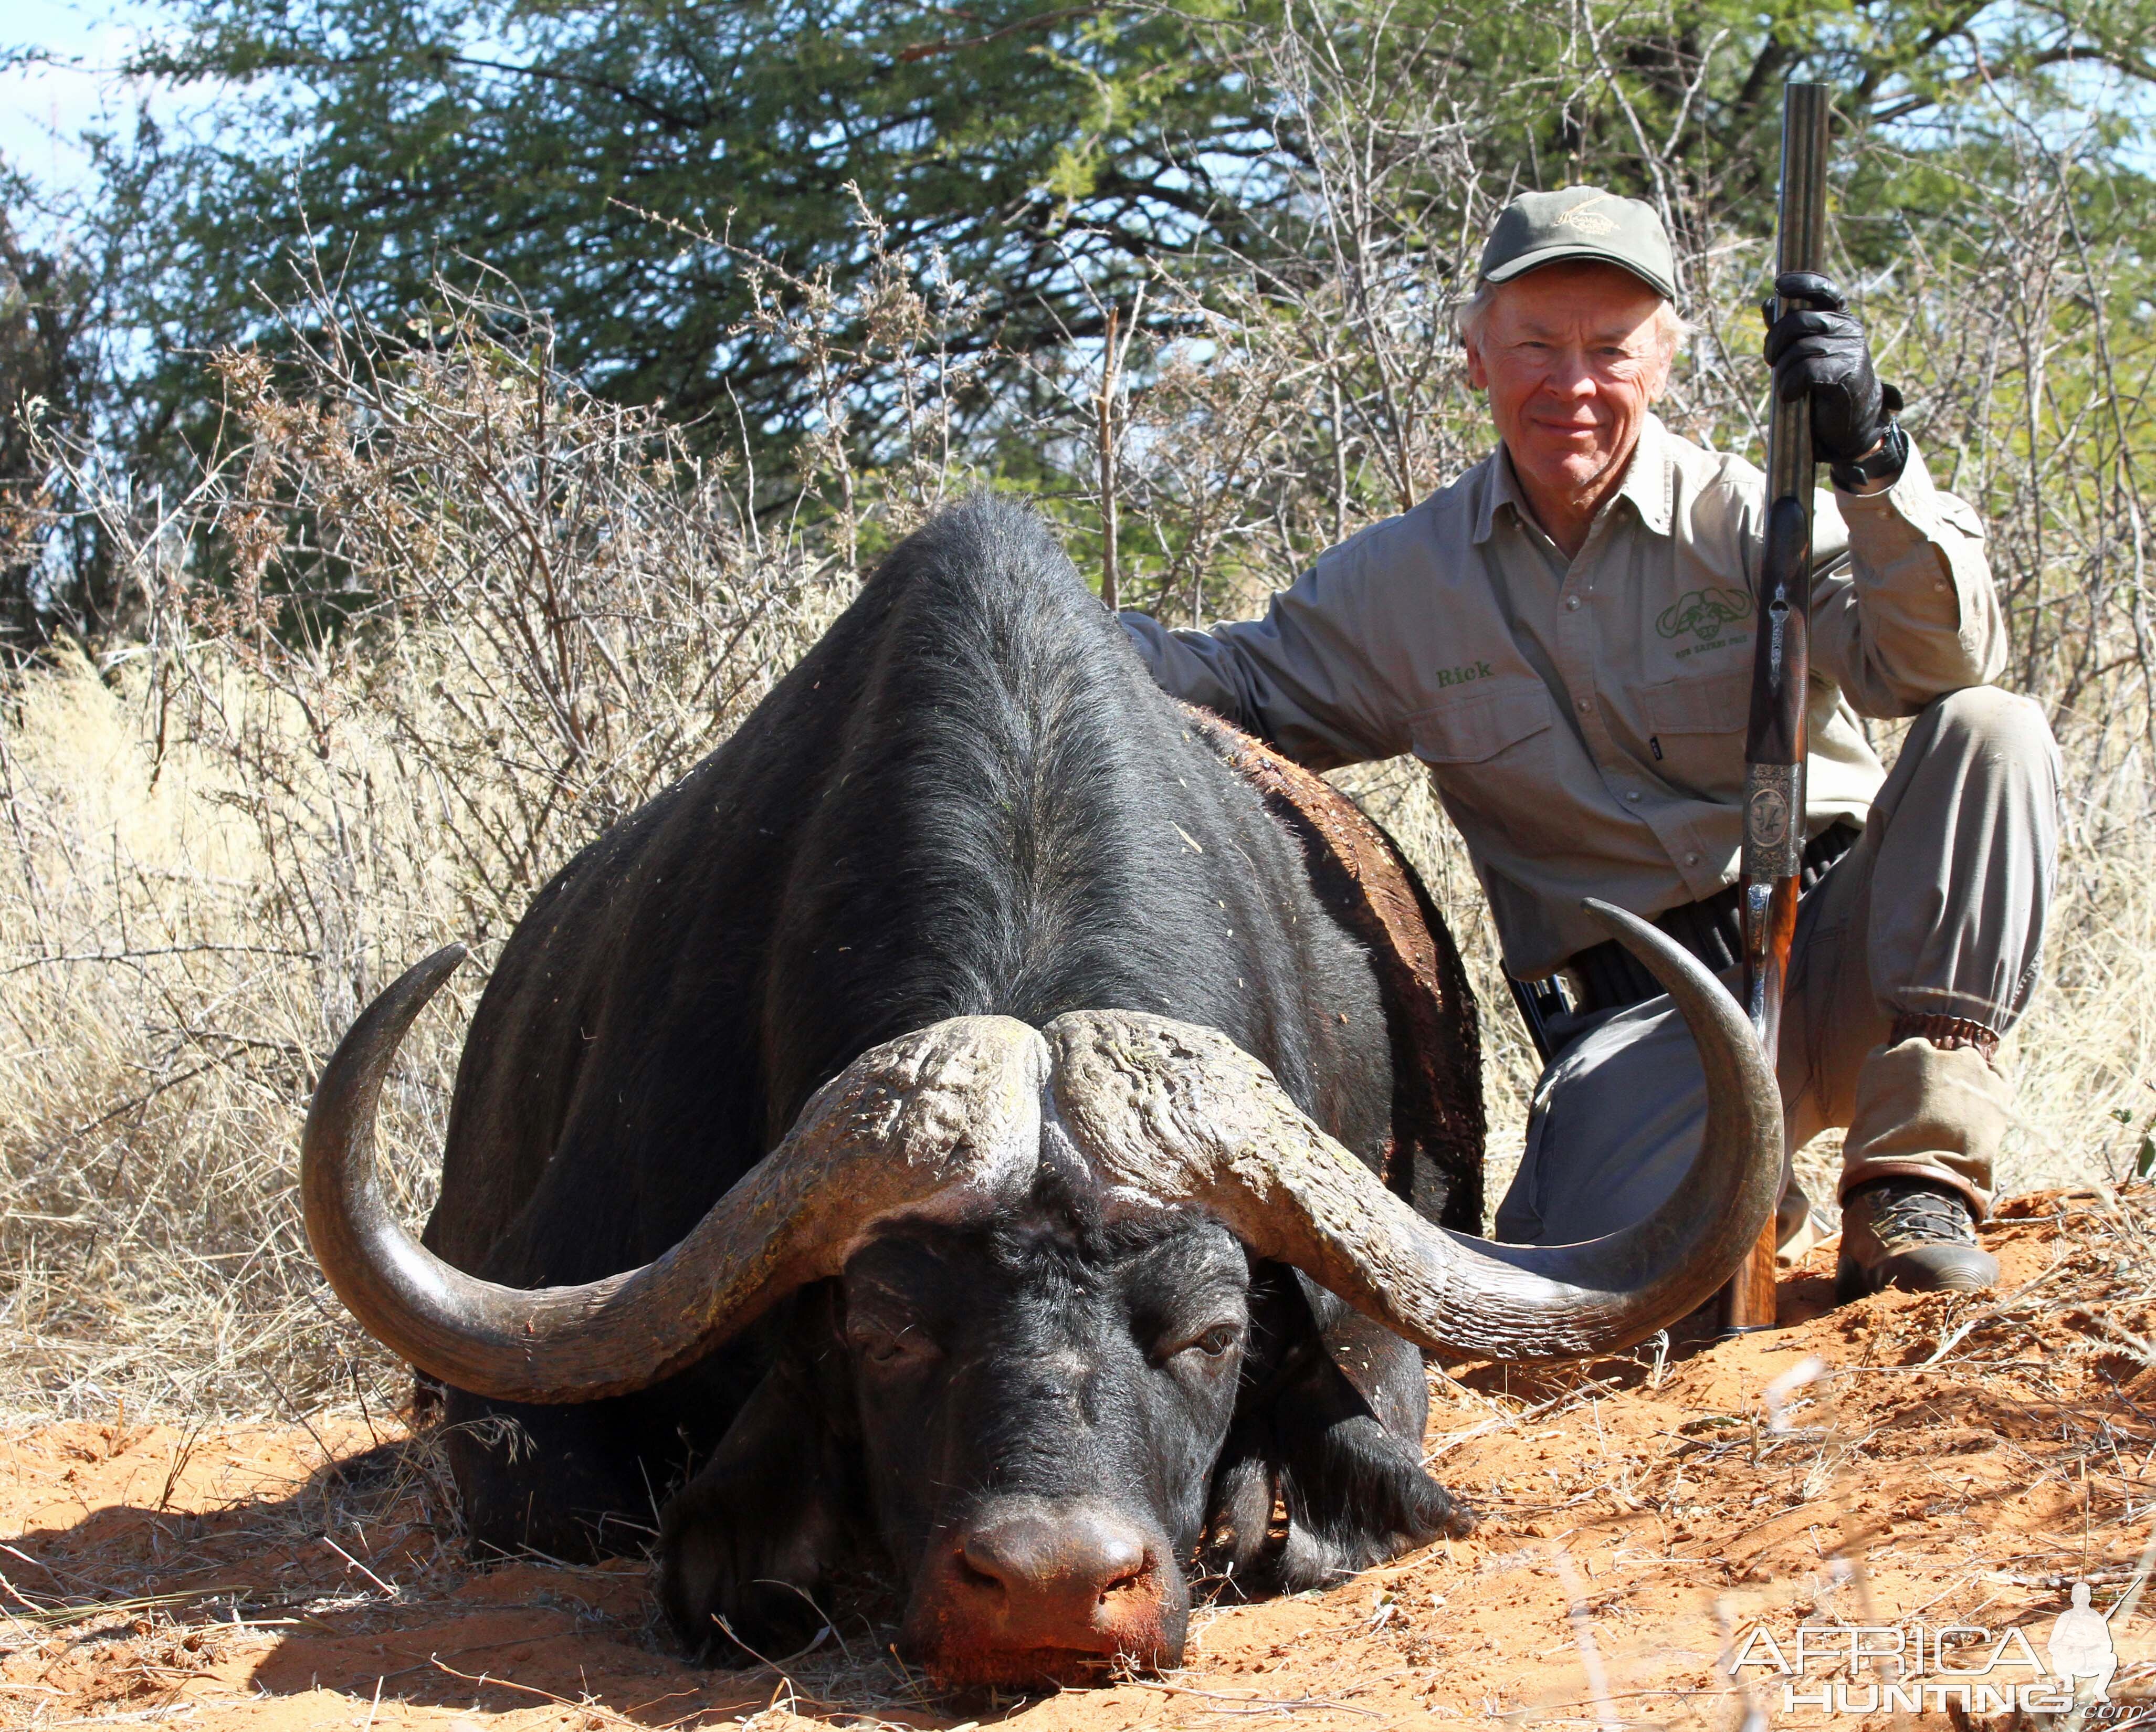 Excellent Buffalo--quite a hunt, long story which I should write about